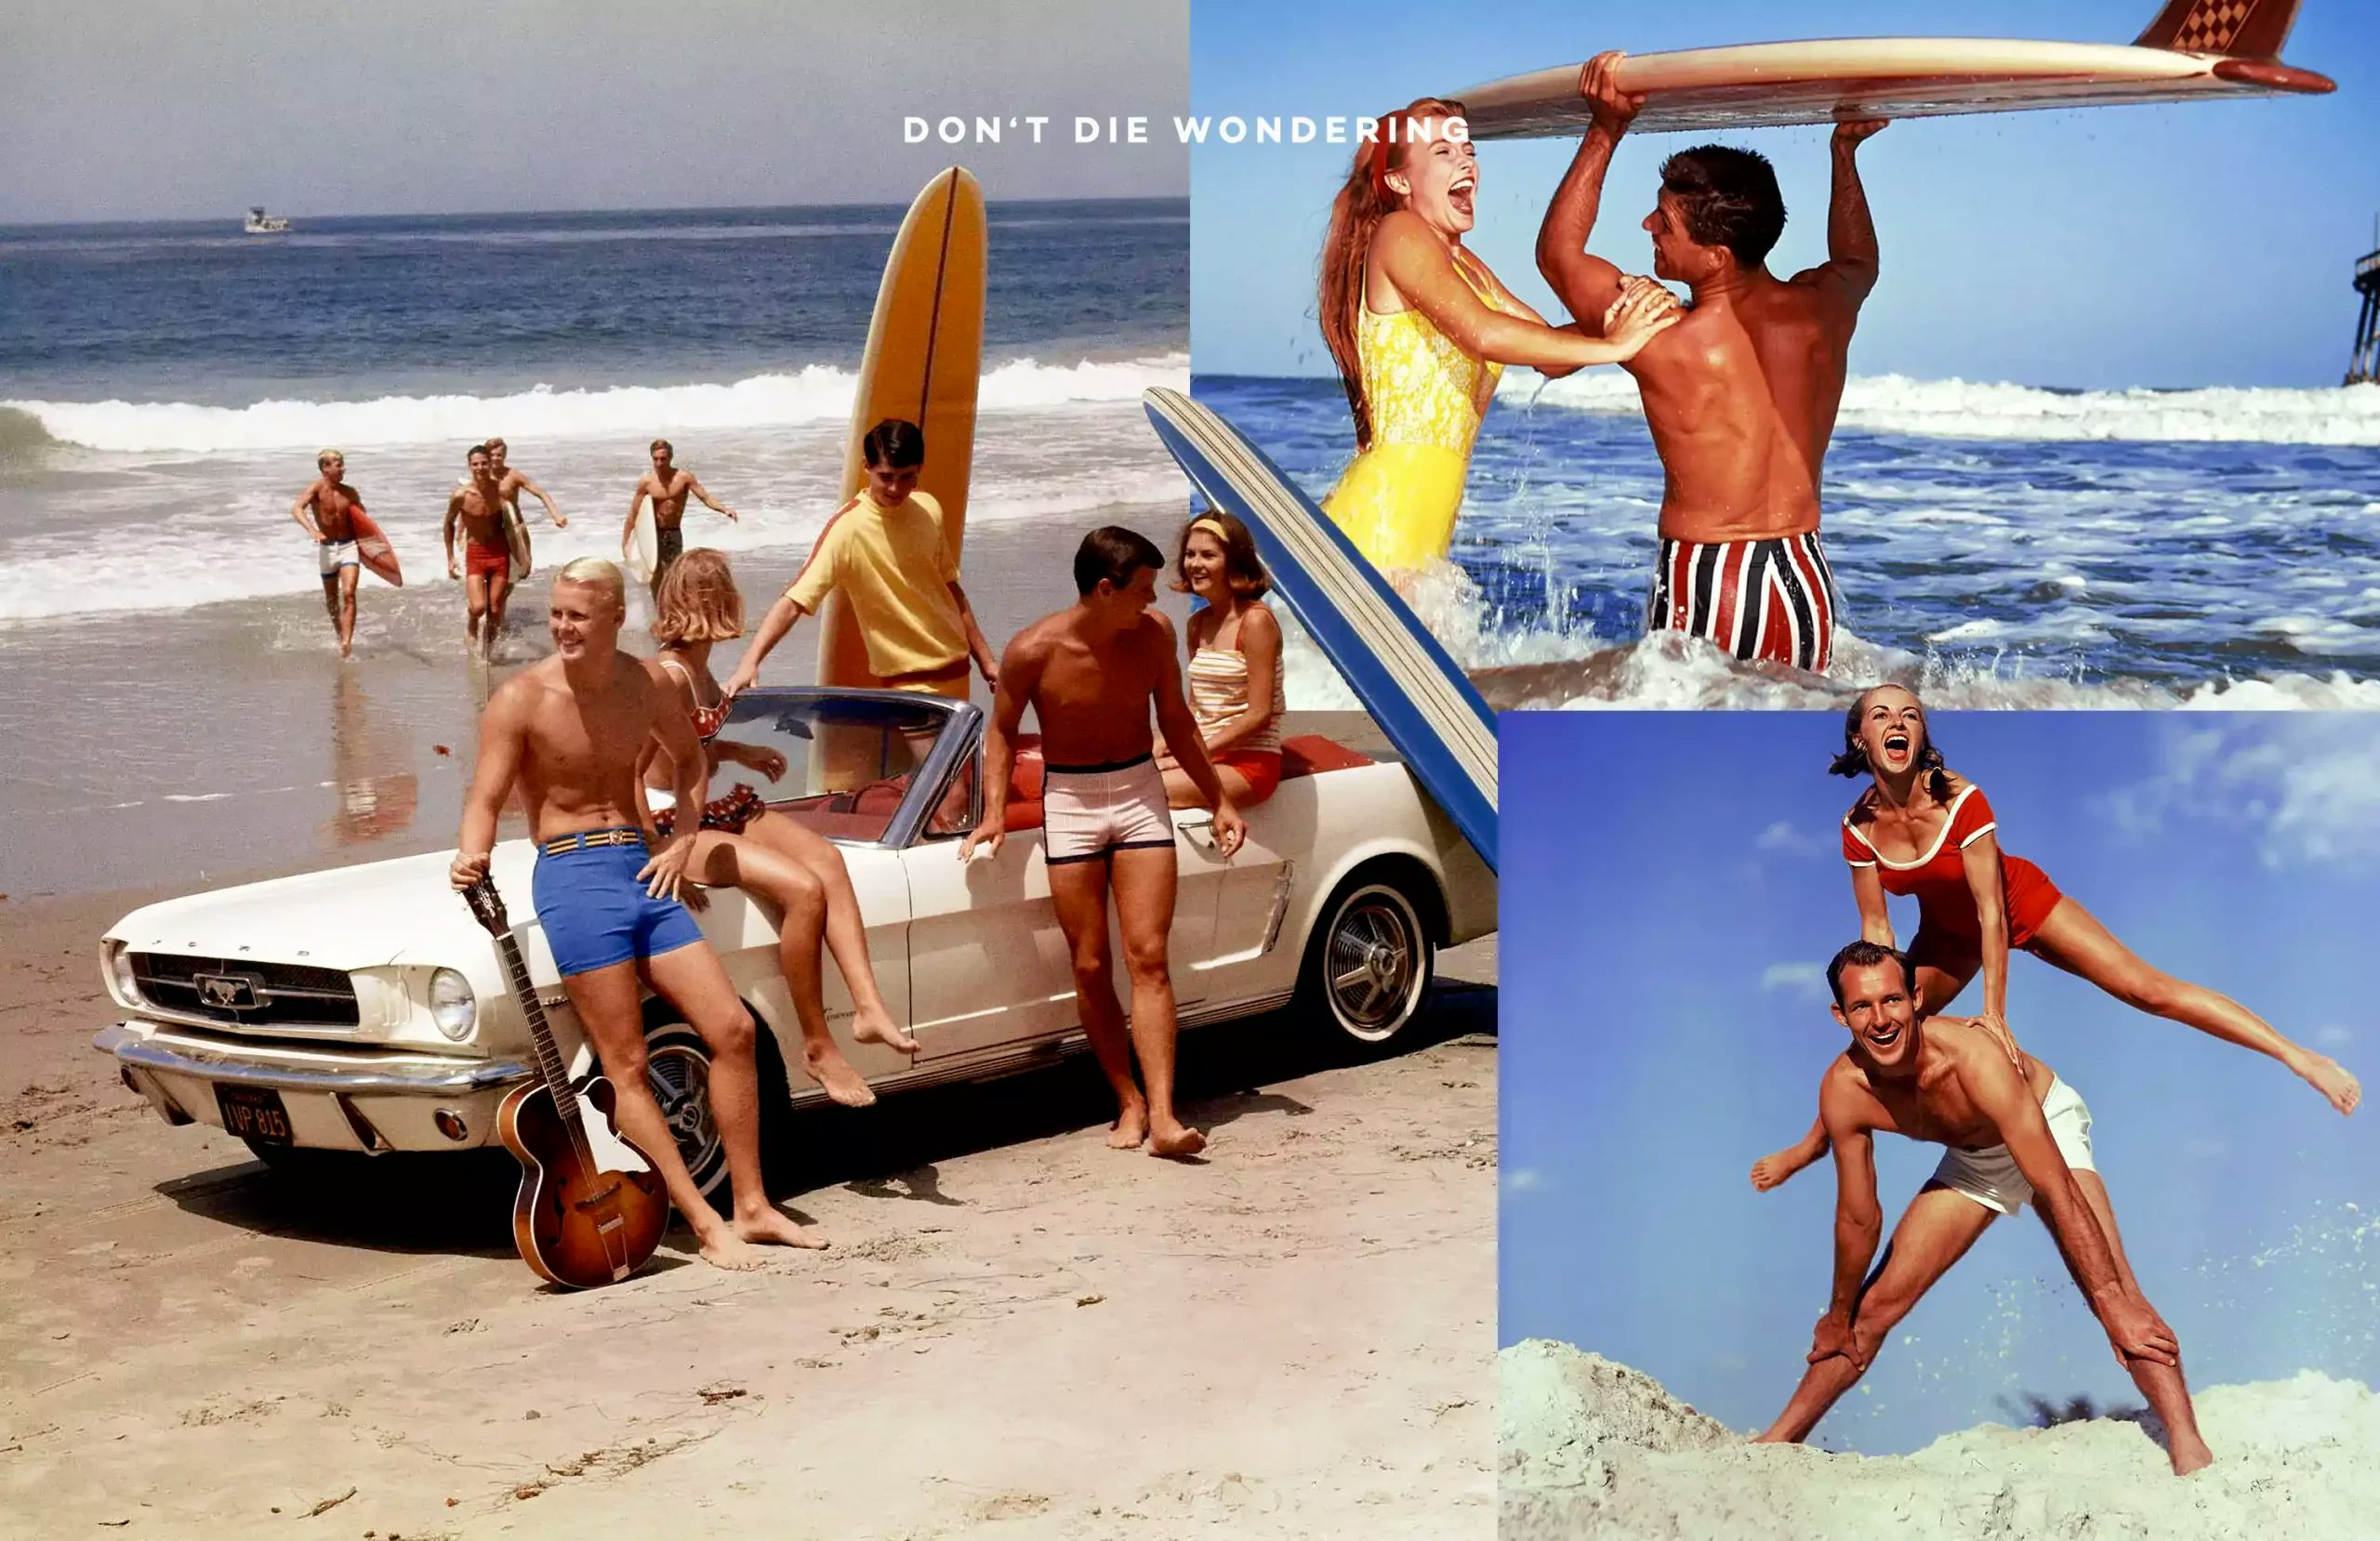 The Strange Relationship Between Surf and Fashion